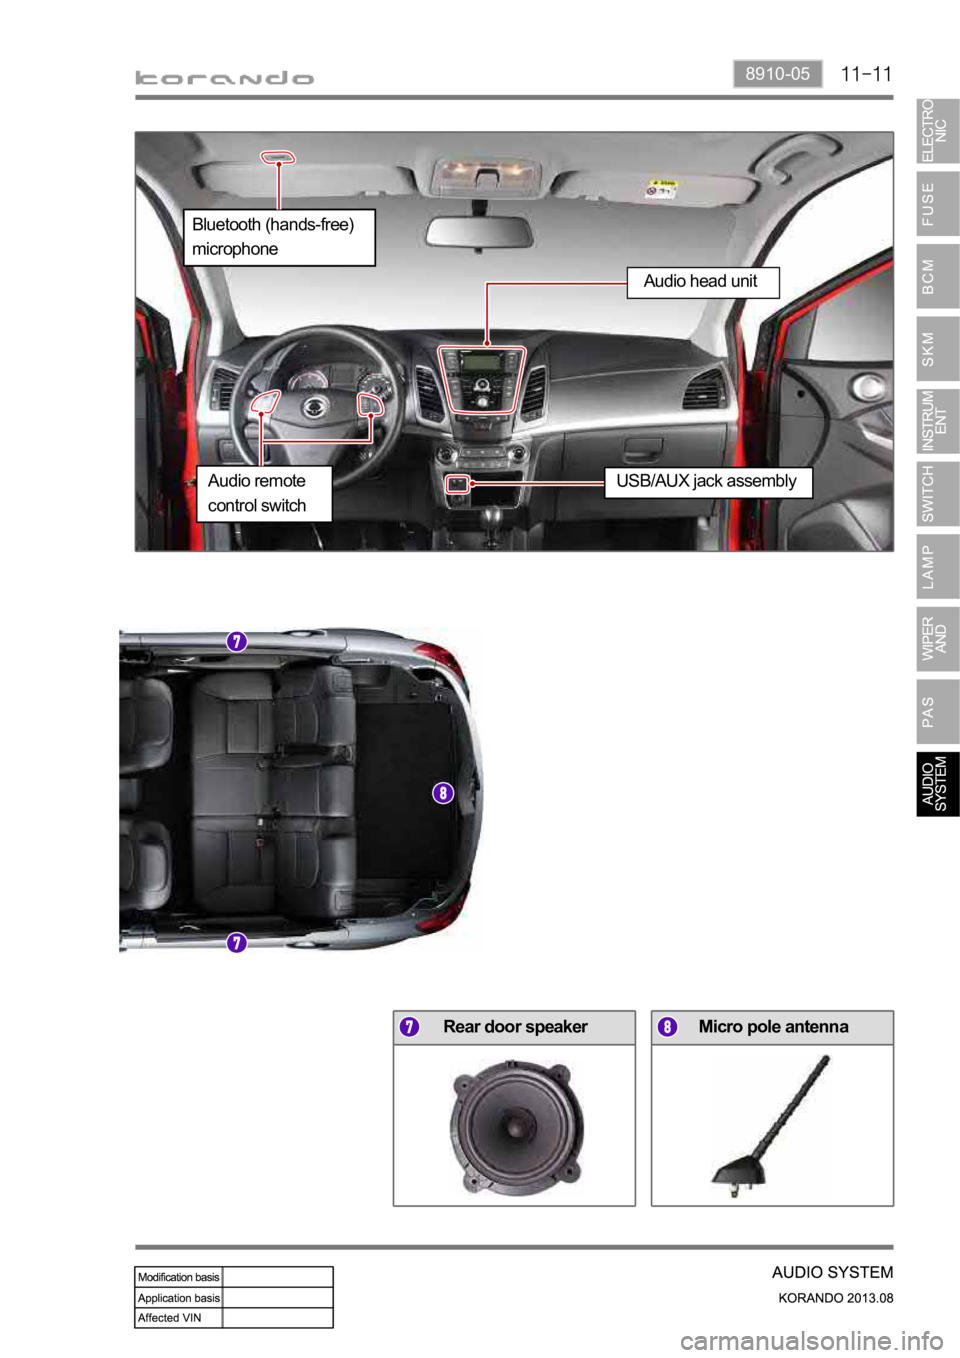 SSANGYONG KORANDO 2013  Service Manual 8910-05
Micro pole antennaRear door speaker
Bluetooth (hands-free) 
microphone
Audio remote 
control switch
USB/AUX jack assembly
Audio head unit 